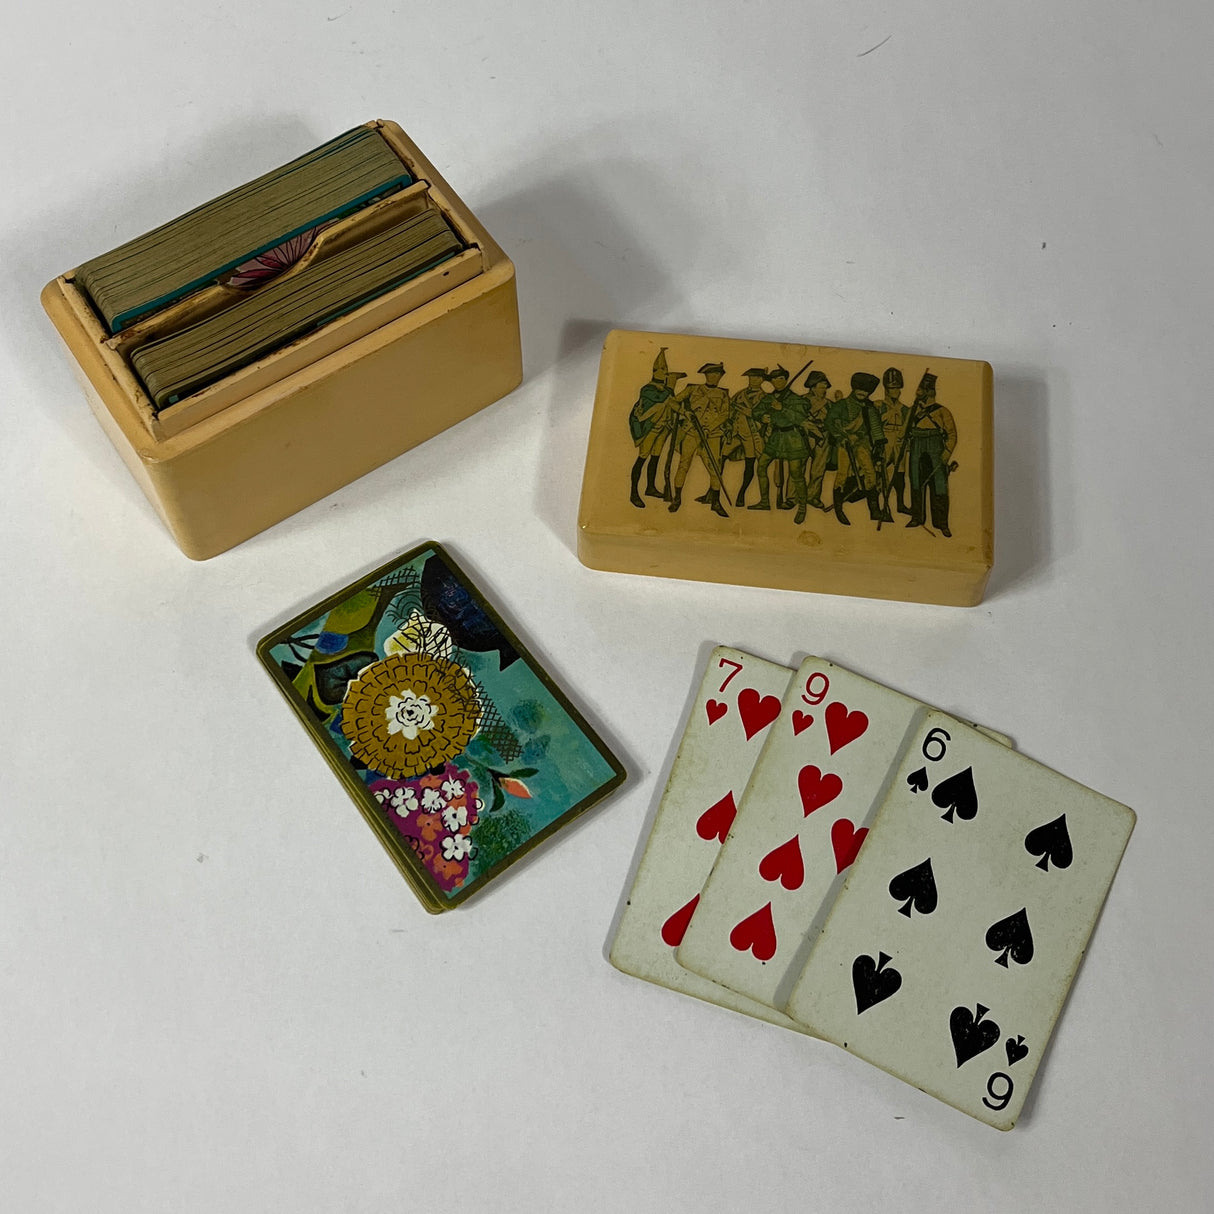 American Revolution Playing Cards Set